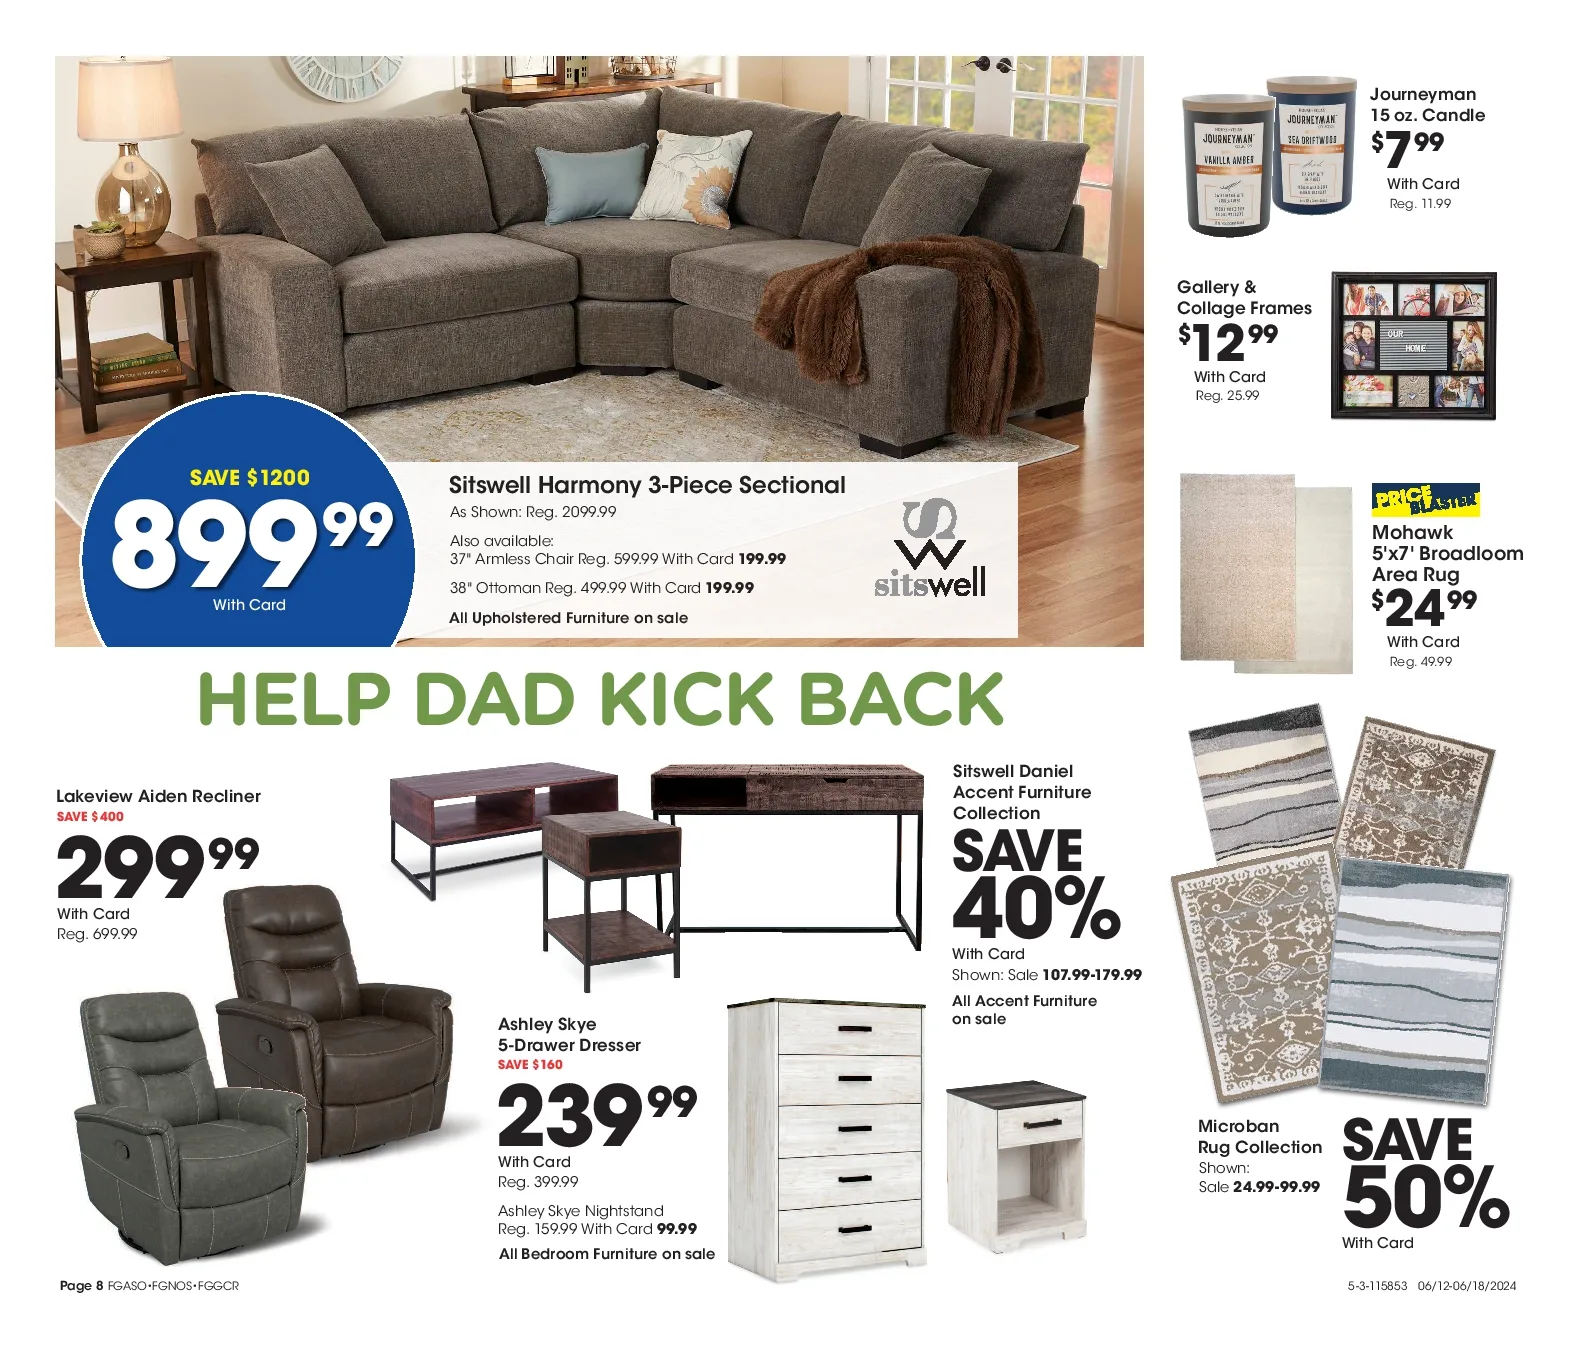 Fred Meyer Weekly Ad July 2024 Weekly Sales, Deals, Discounts and Digital Coupons.